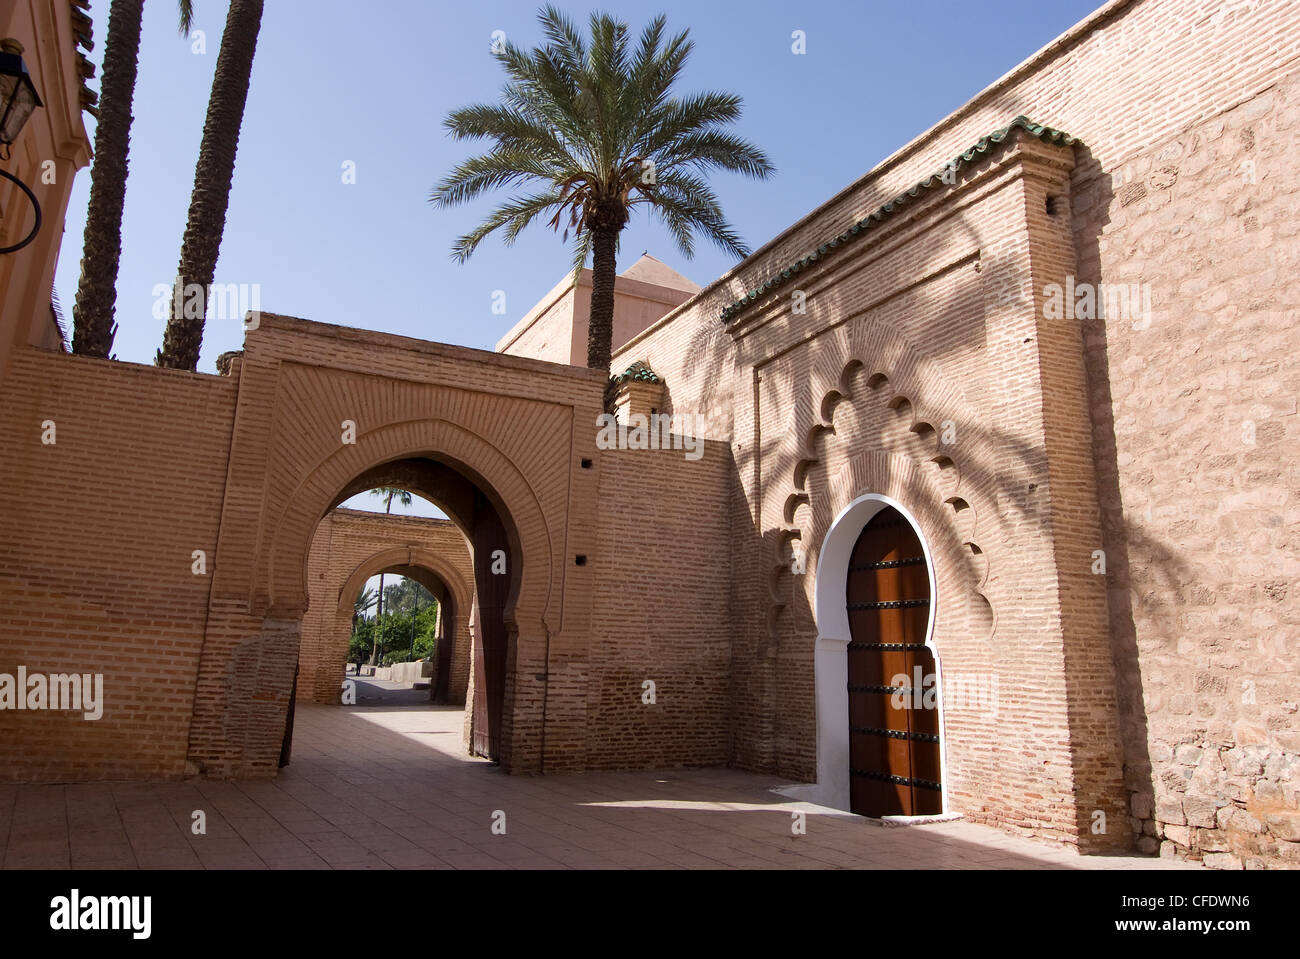 The Koutoubia Mosque (Booksellers' Mosque), the landmark of Marrakech, Morocco, North Africa, Africa Stock Photo